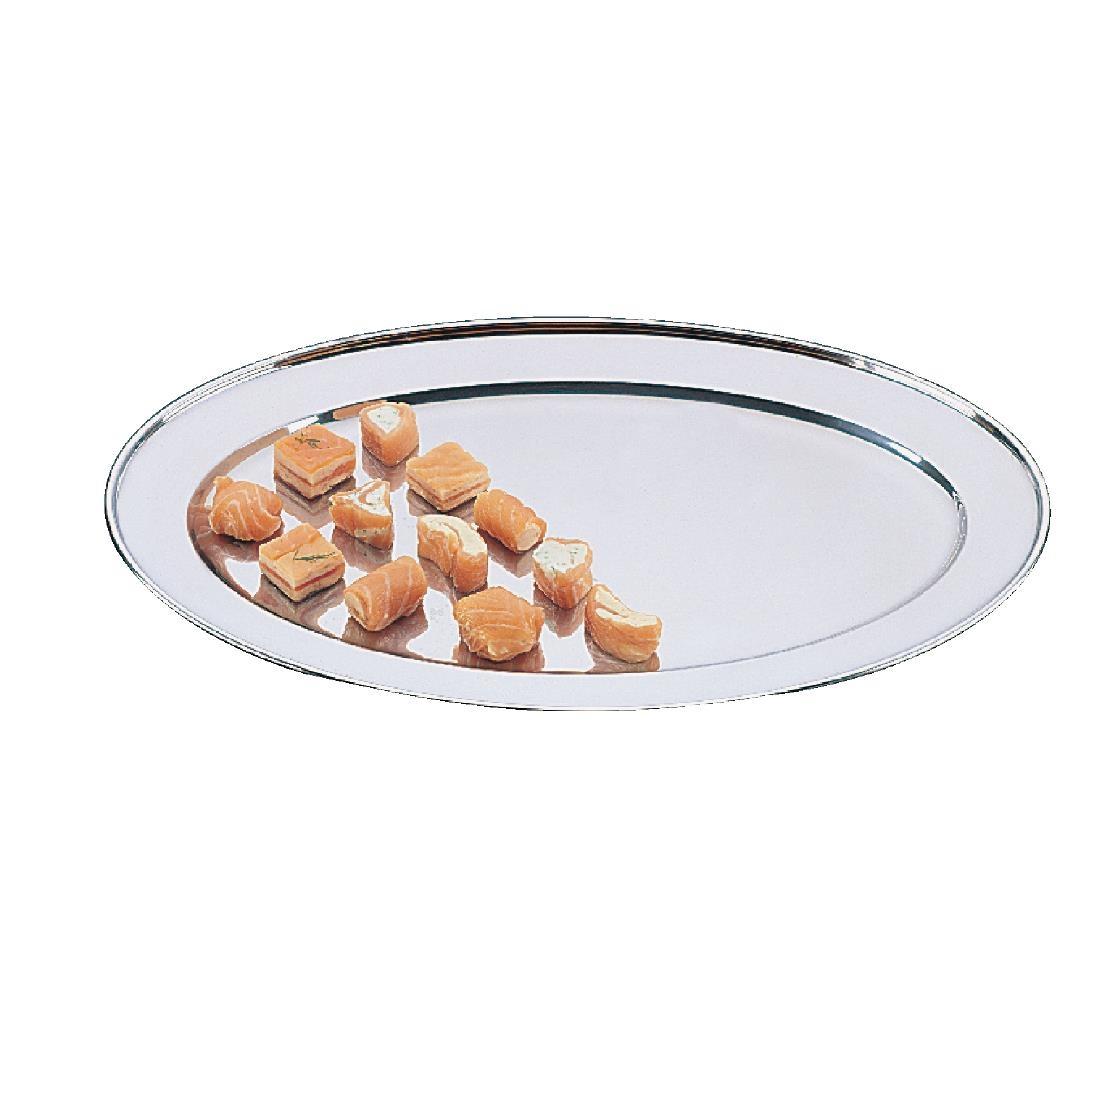 Olympia Stainless Steel Oval Serving Tray 200mm - K360  - 1